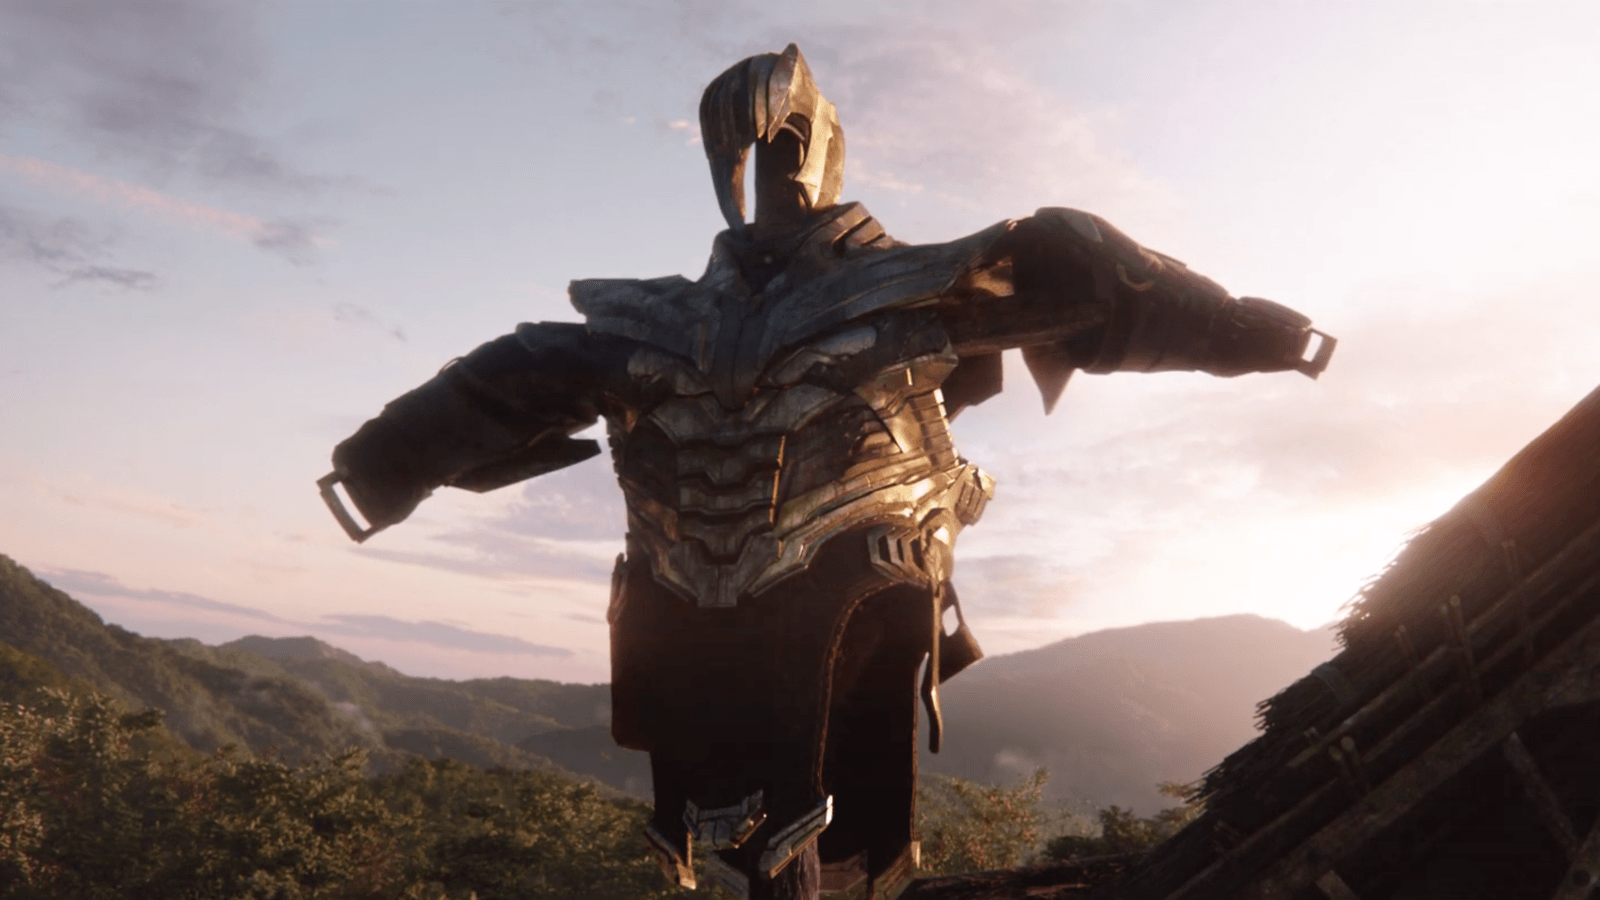 Avengers: Endgame countdown hits 100 days, so here are some